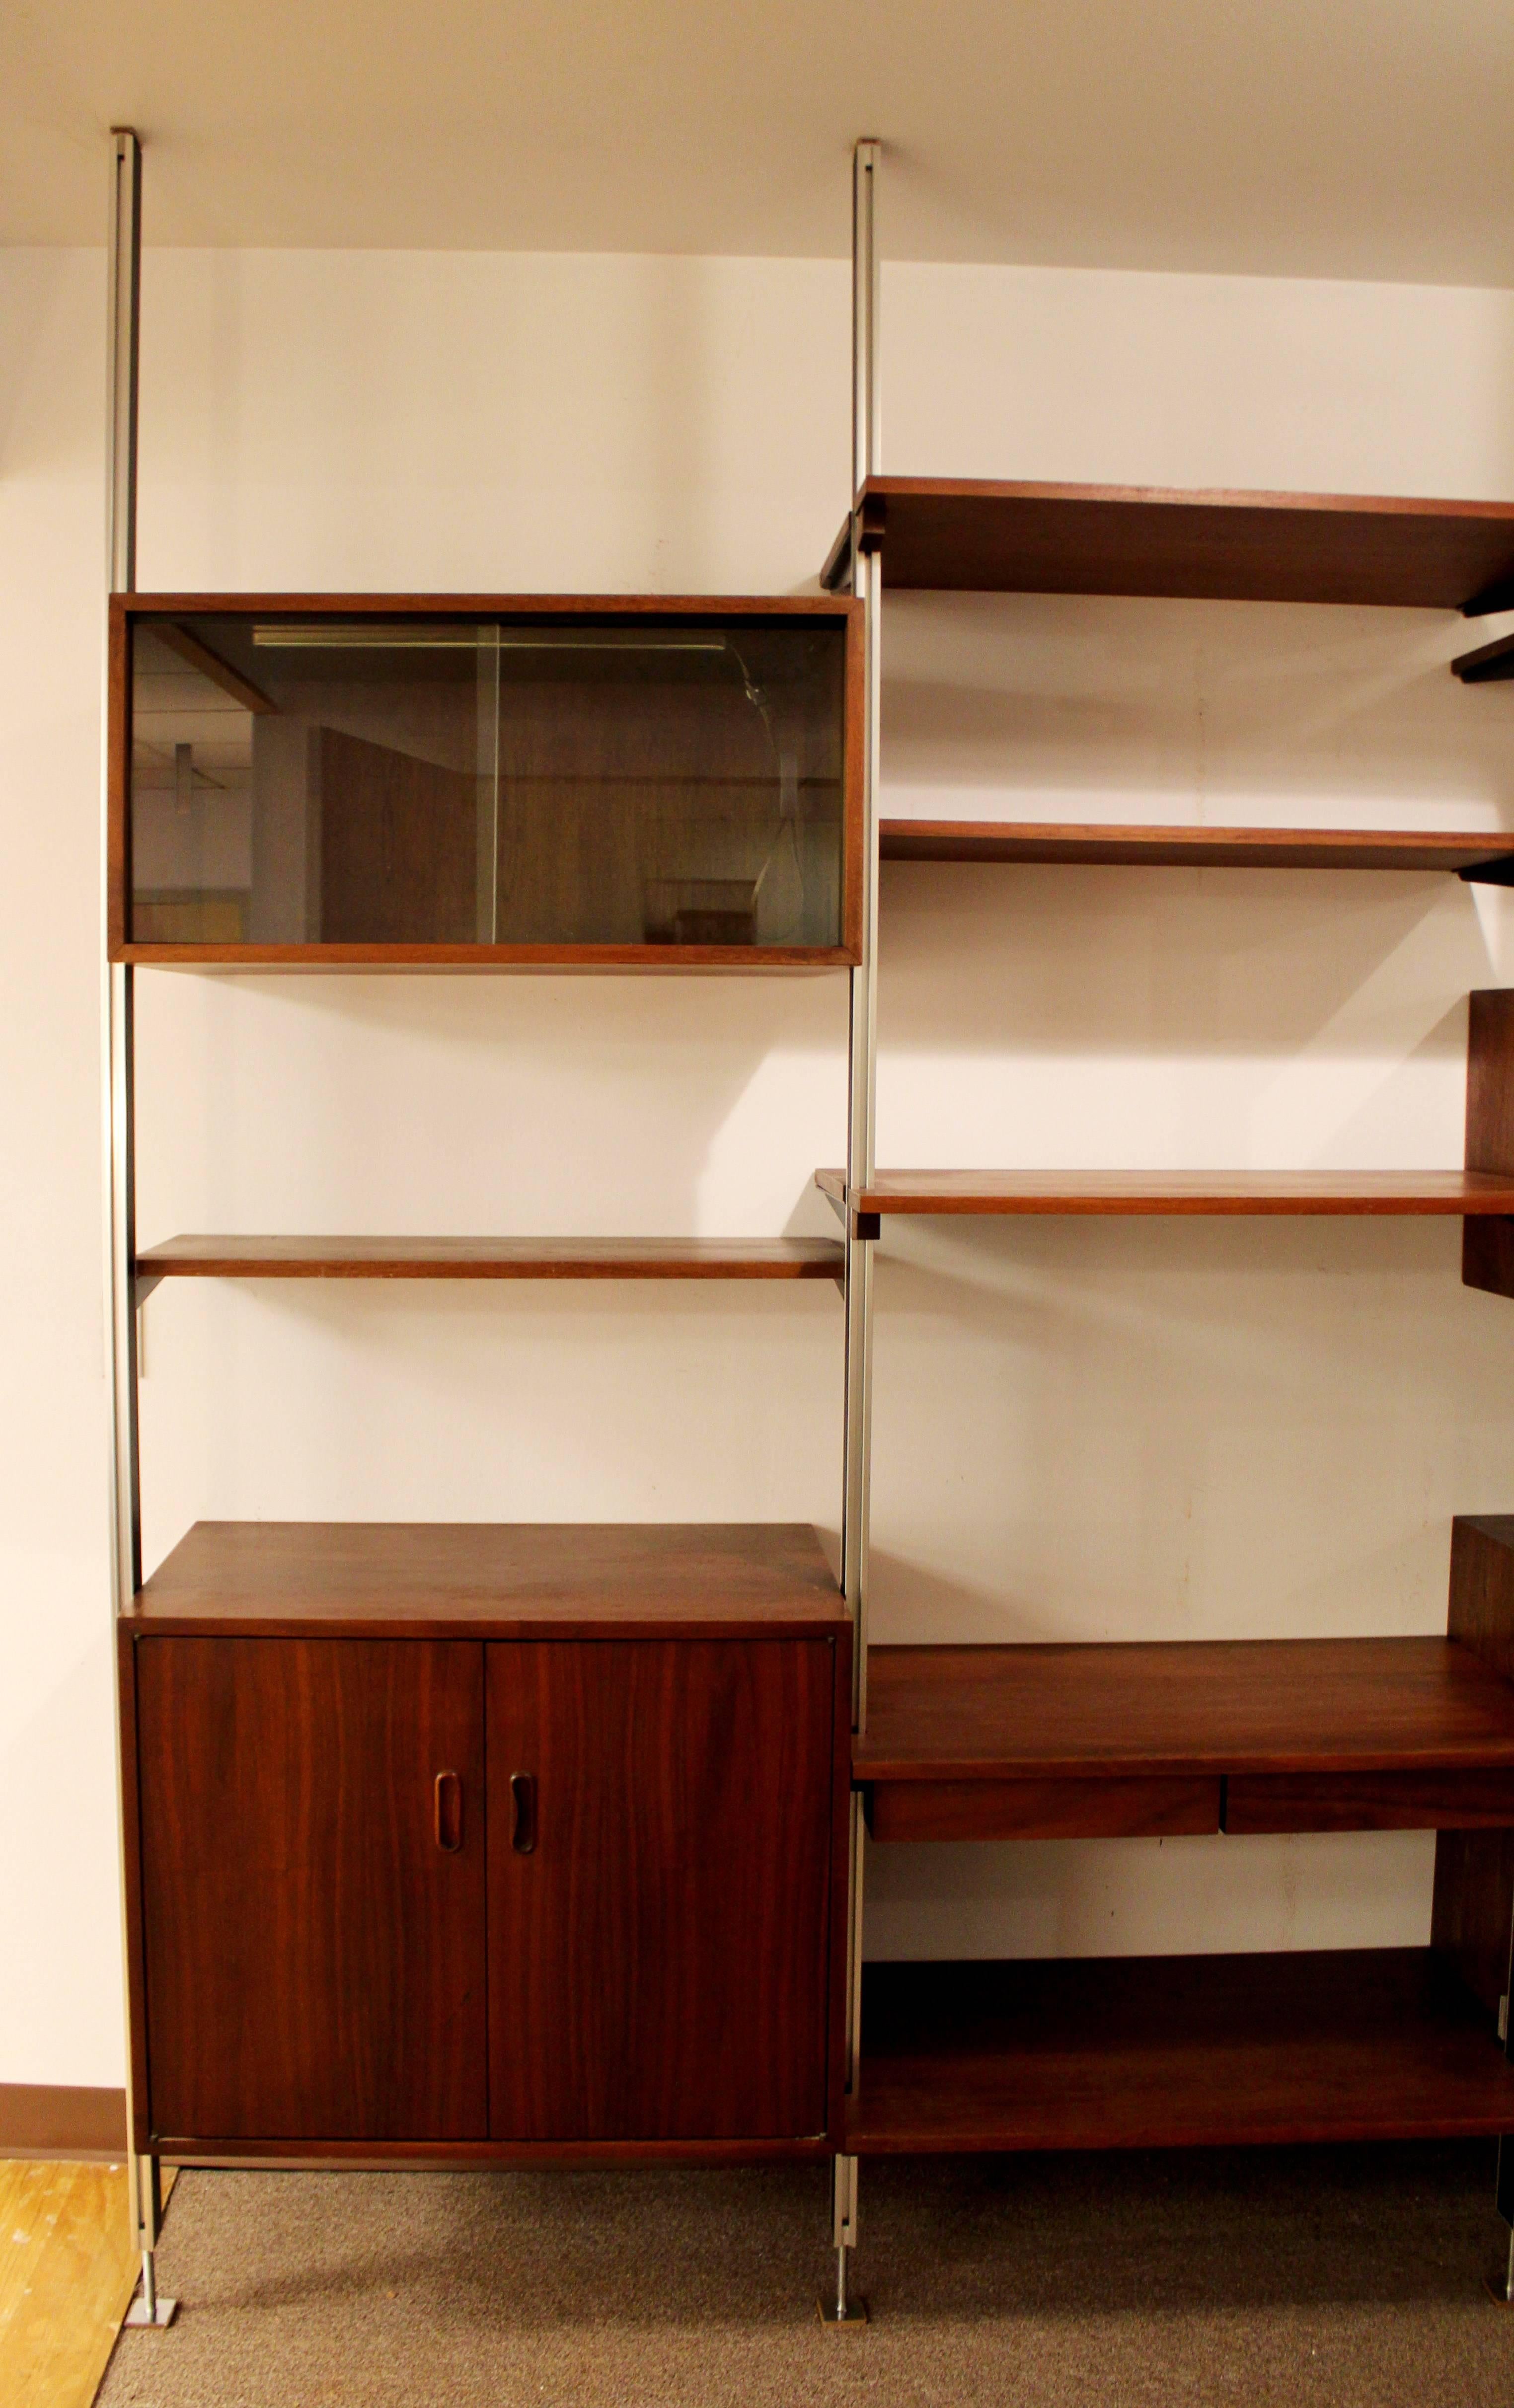 Omni wall shelf unit or room divider. Made of walnut and aluminum, by George Nelson. With tambour doors, sliding glass front, light up section. In excellent condition. The dimensions are 130